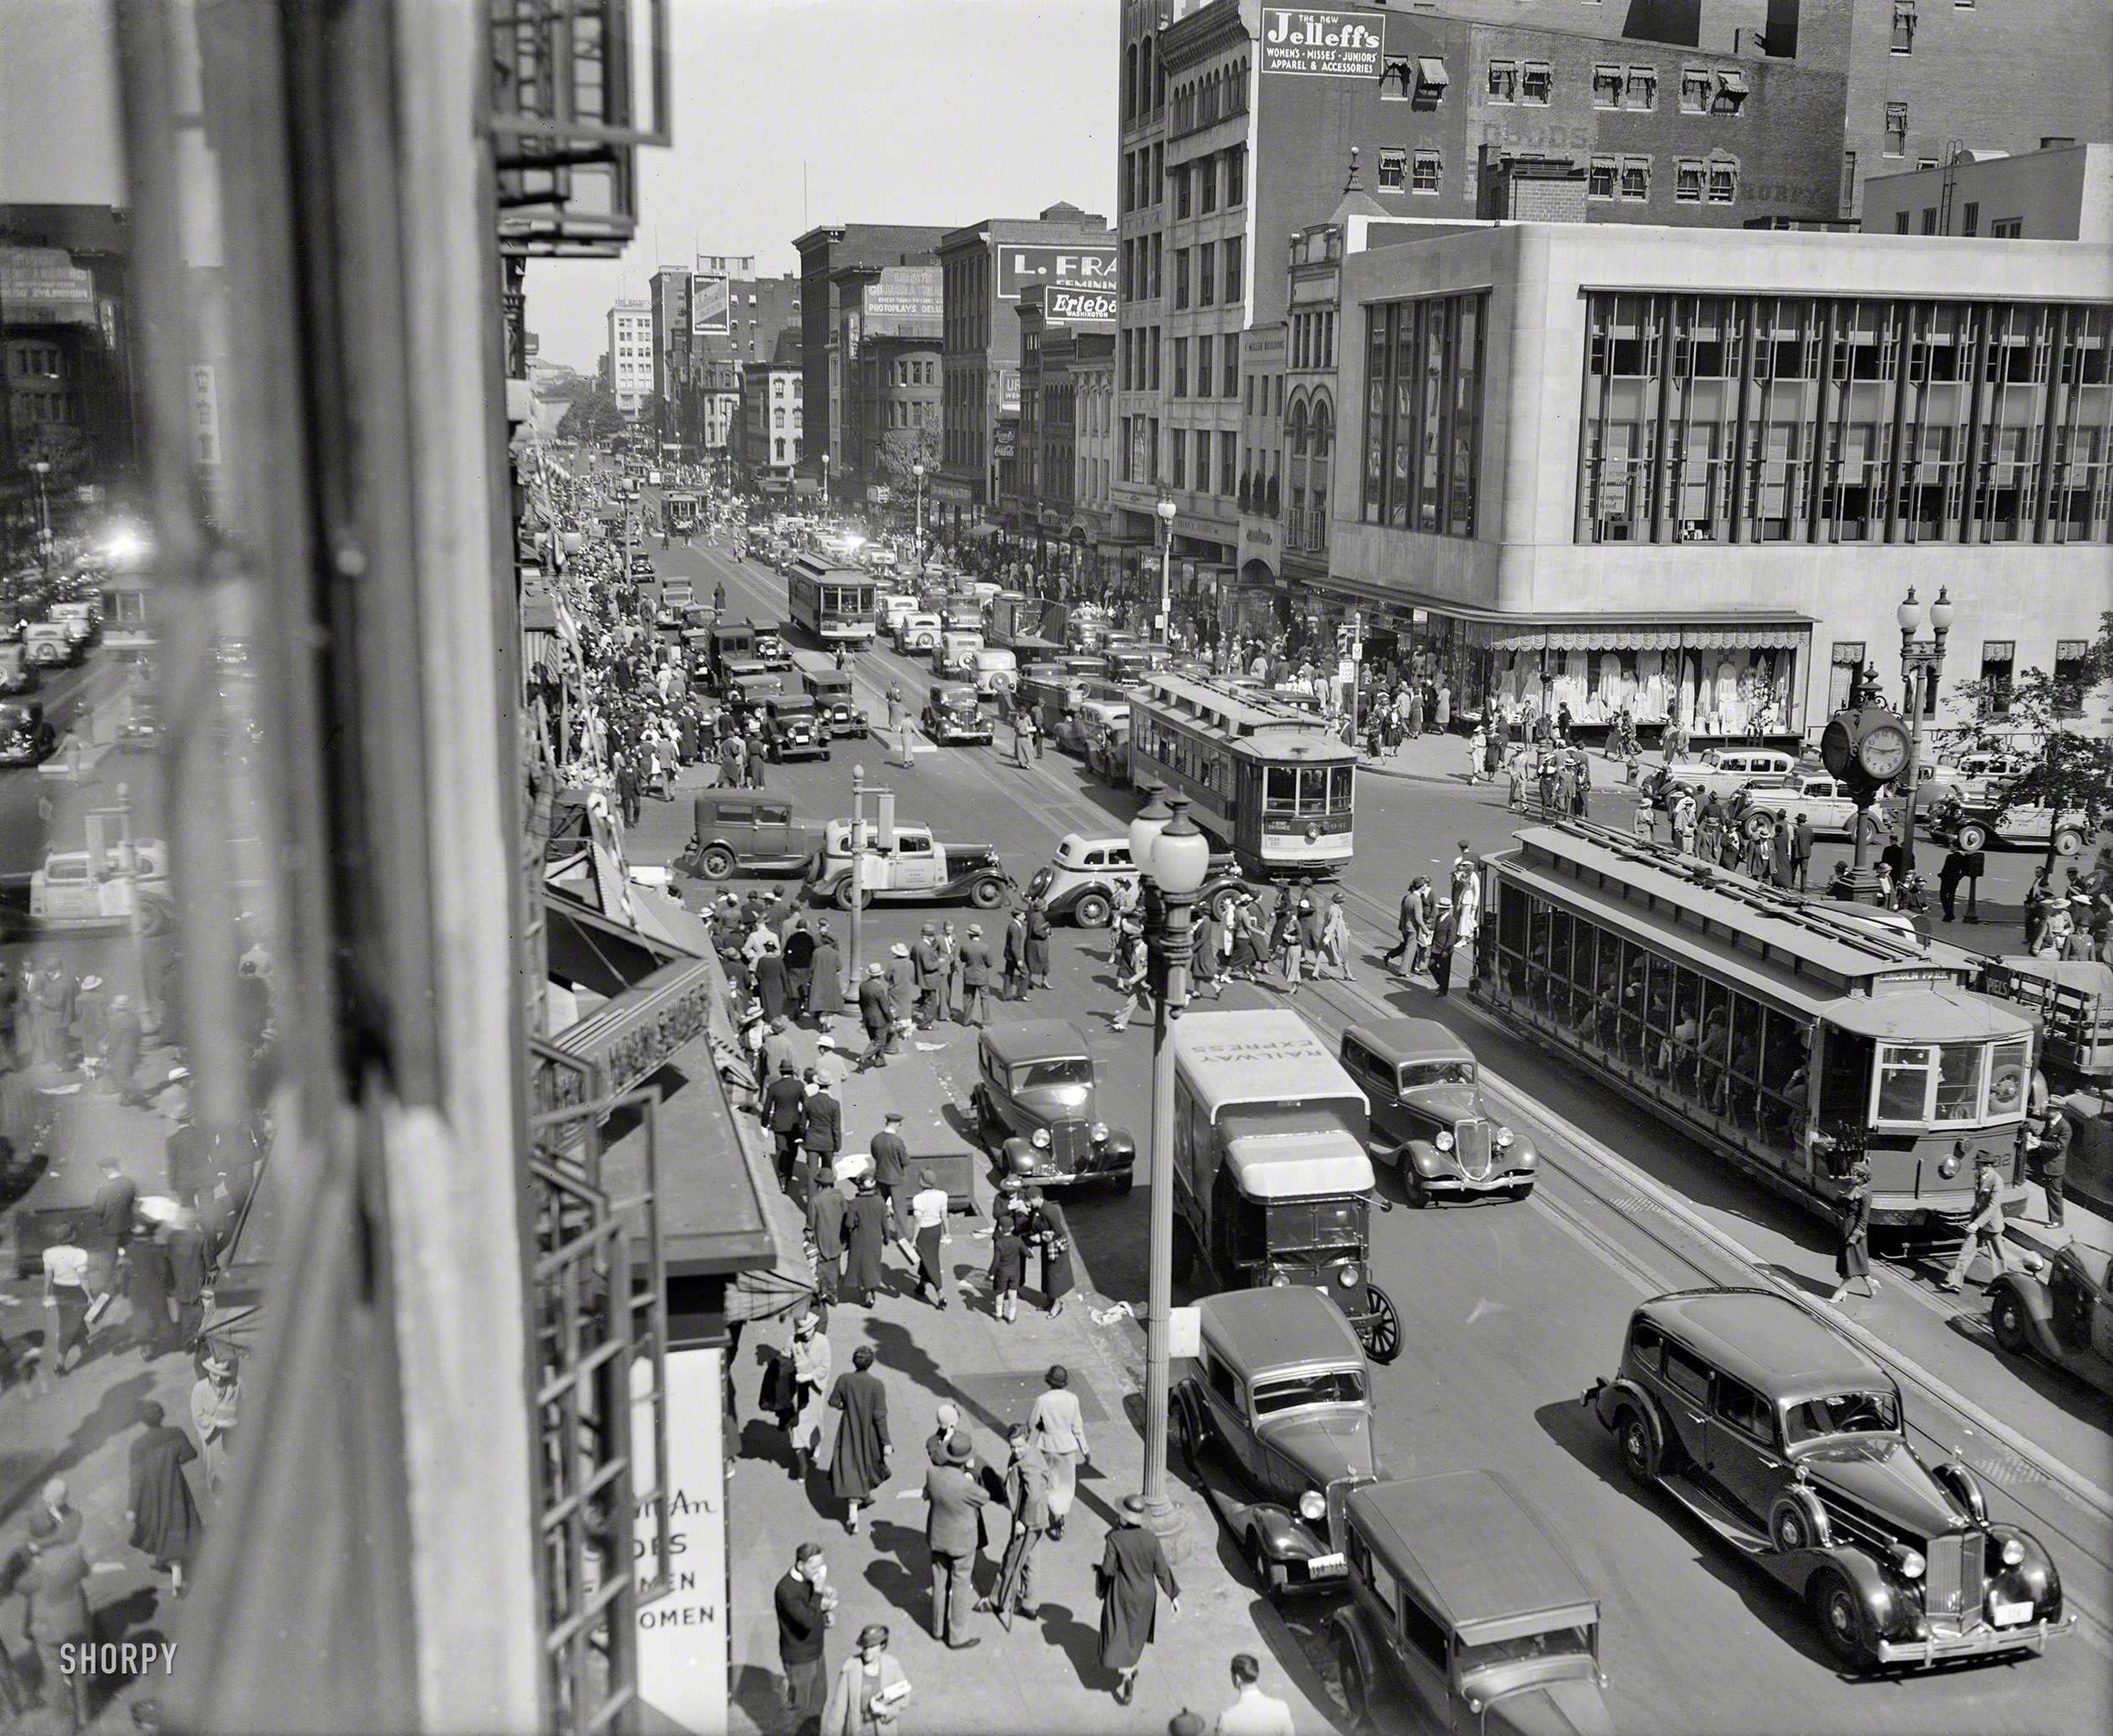 1935. "F Street, Washington, D.C." The view from the Harris & Ewing photographic studio at exactly 2:47. 4x5 inch glass negative. View full size.